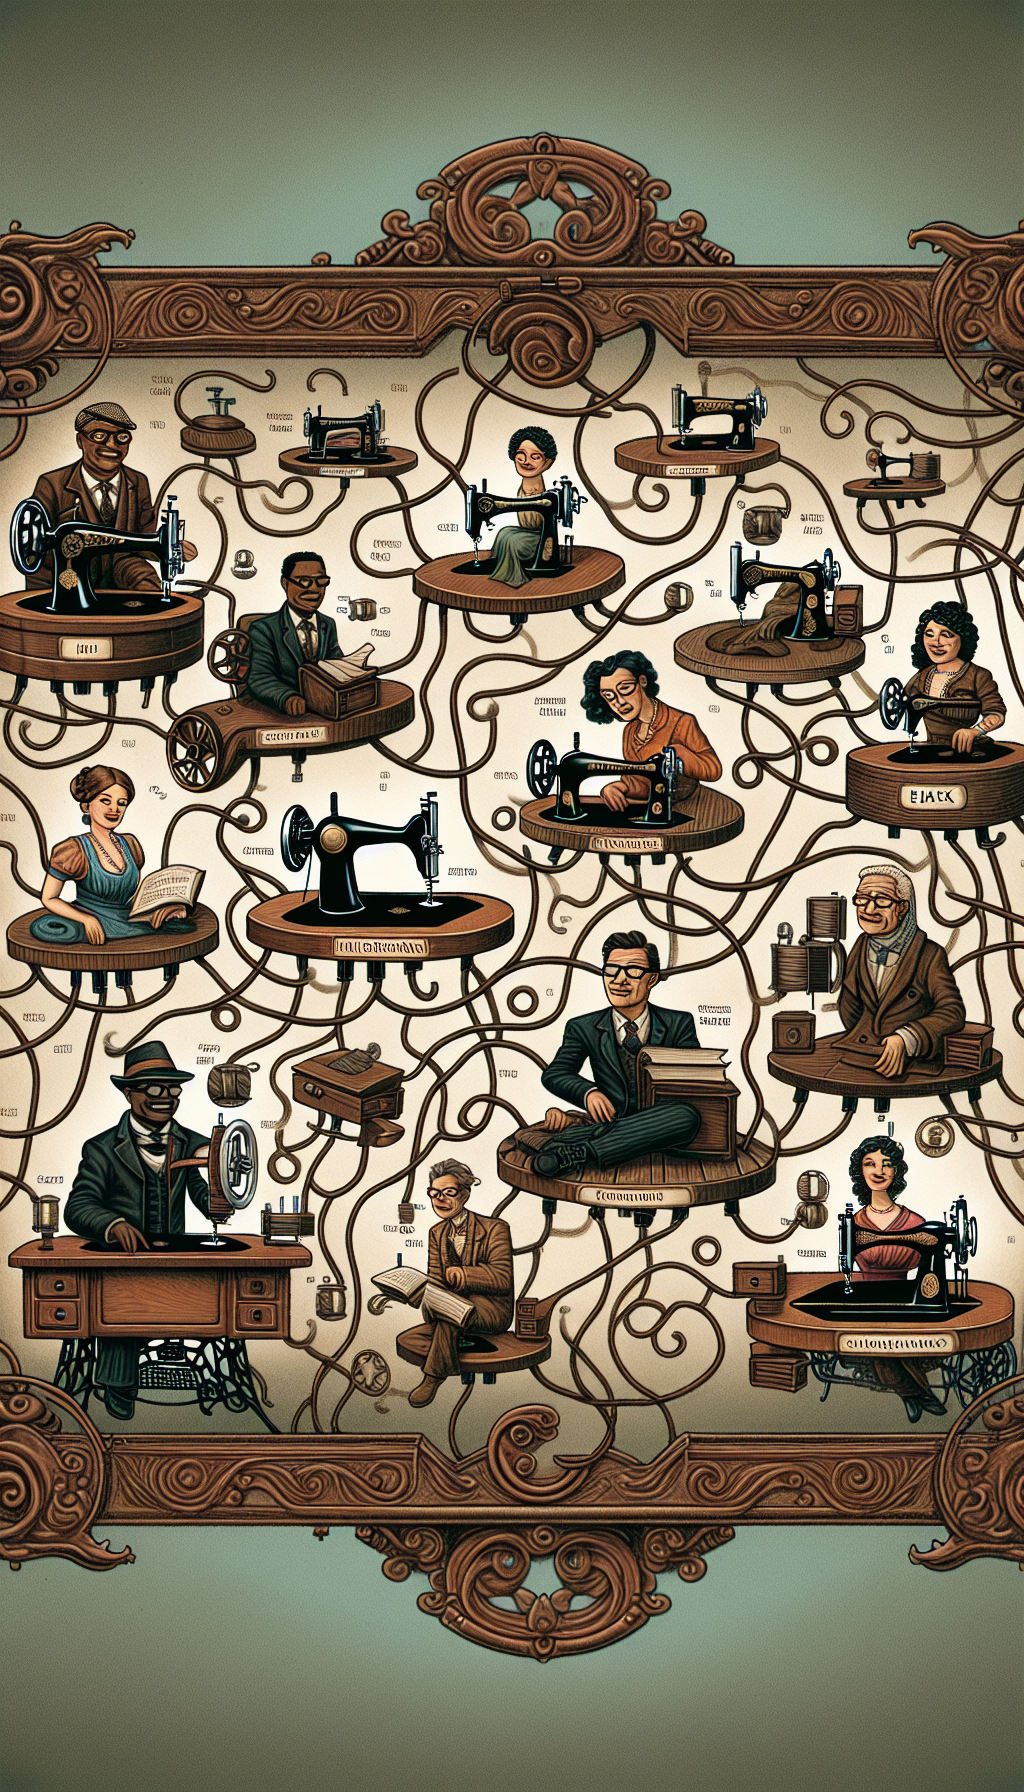 A whimsical steampunk-style illustration depicting a network of intertwining vines, each branch connecting vintage sewing machines to caricatured experts with magnifying glasses and books. The vines represent social media threads or antique store aisles, while the old sewing machines are perched like nodes of knowledge, symbolizing the value and history they hold, waiting to be unlocked by those who know where to look.